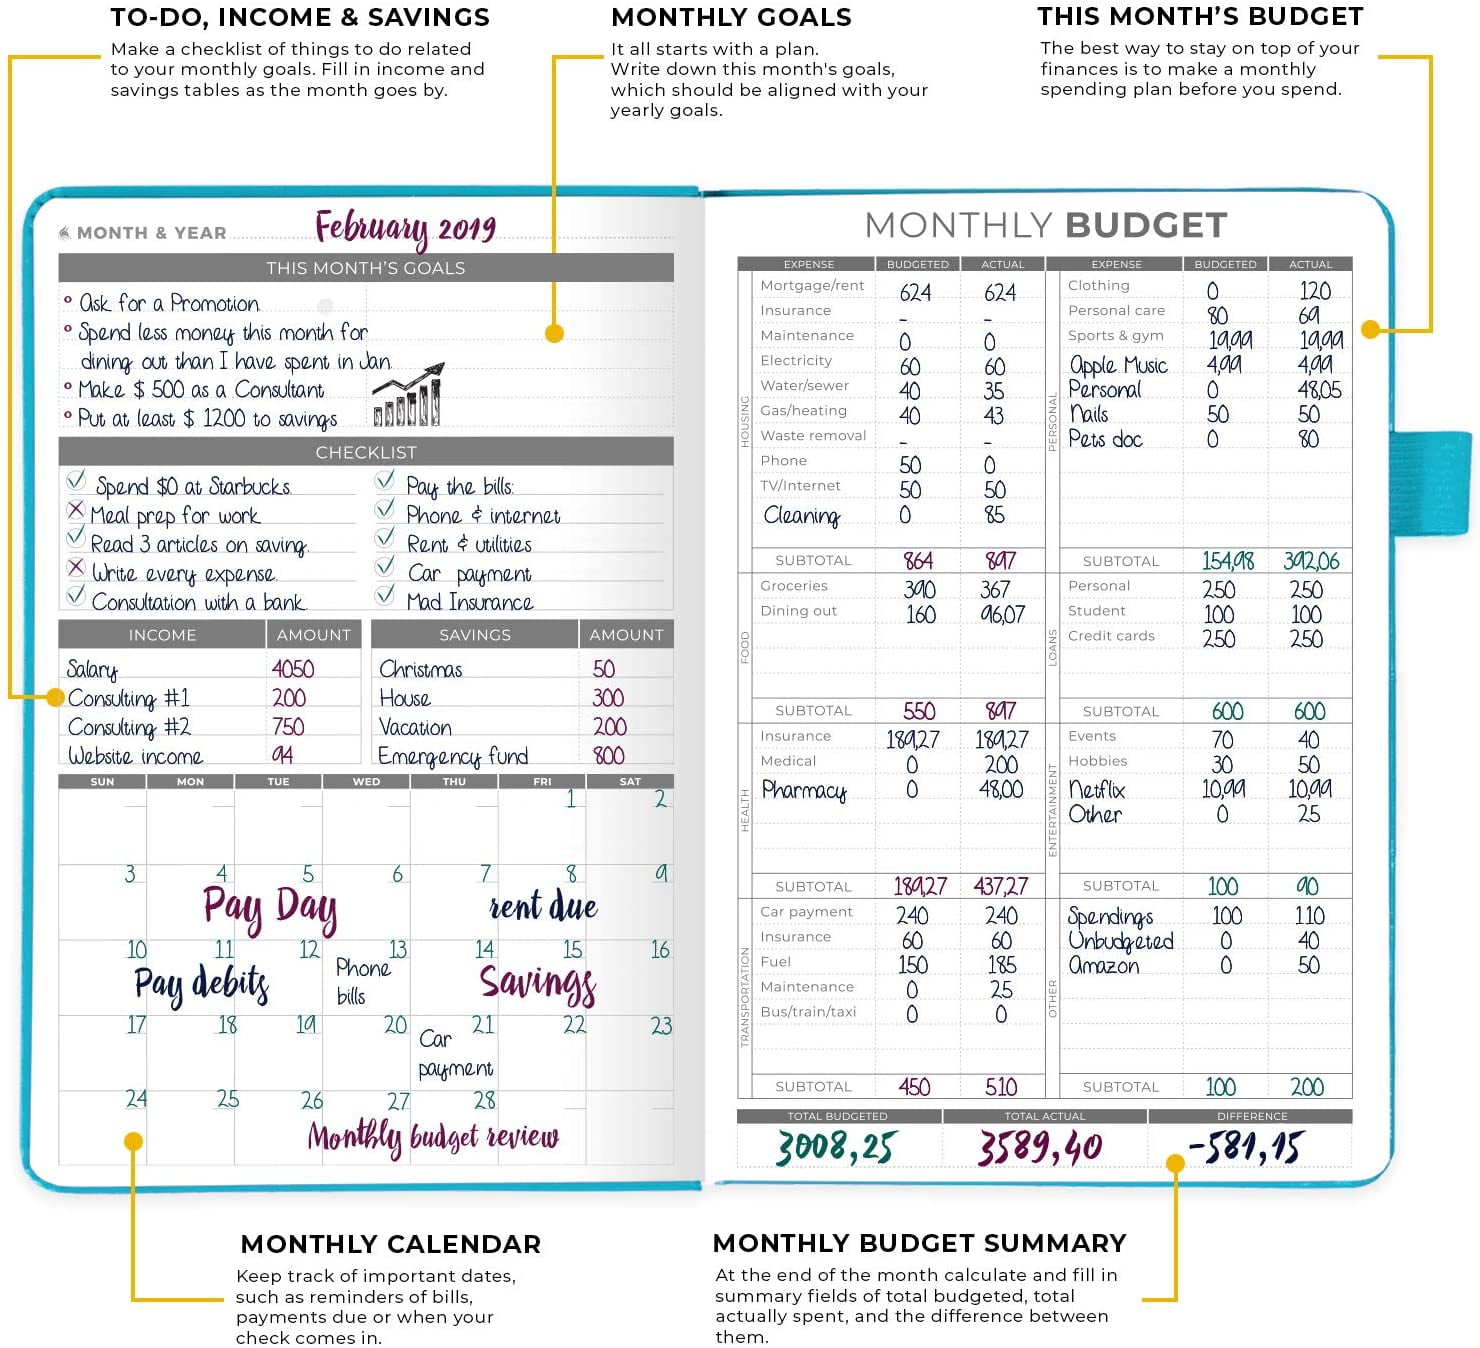 Clever Fox Budget Planner MonthlyBudgetingJournal... Expense Tracker Notebook 